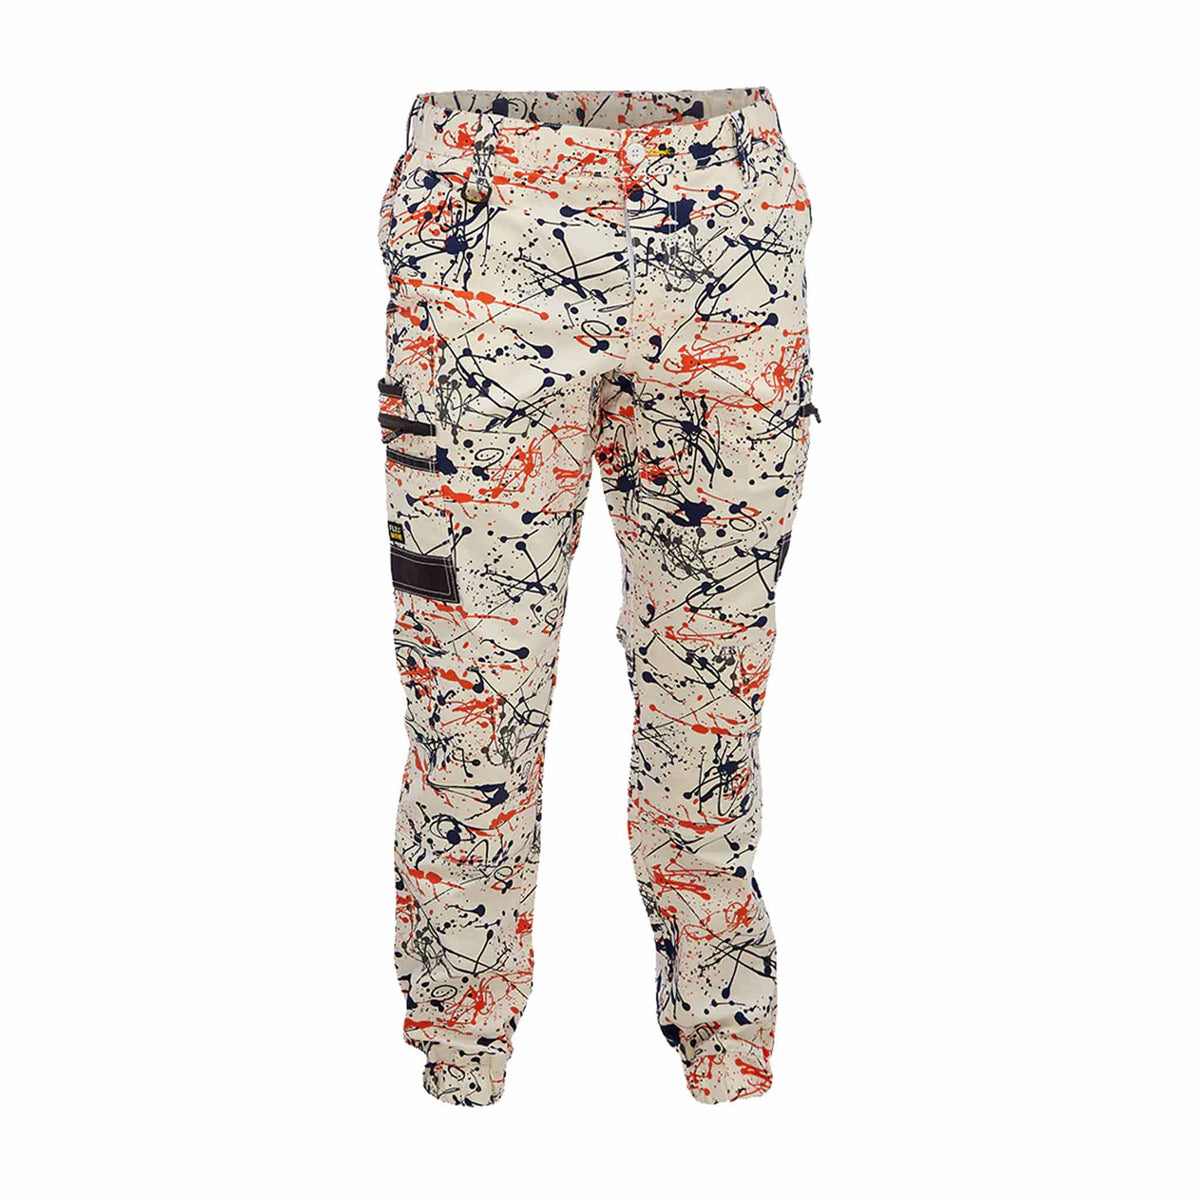 bisley flx and move stretch camo cargo pants in orange paint splatter